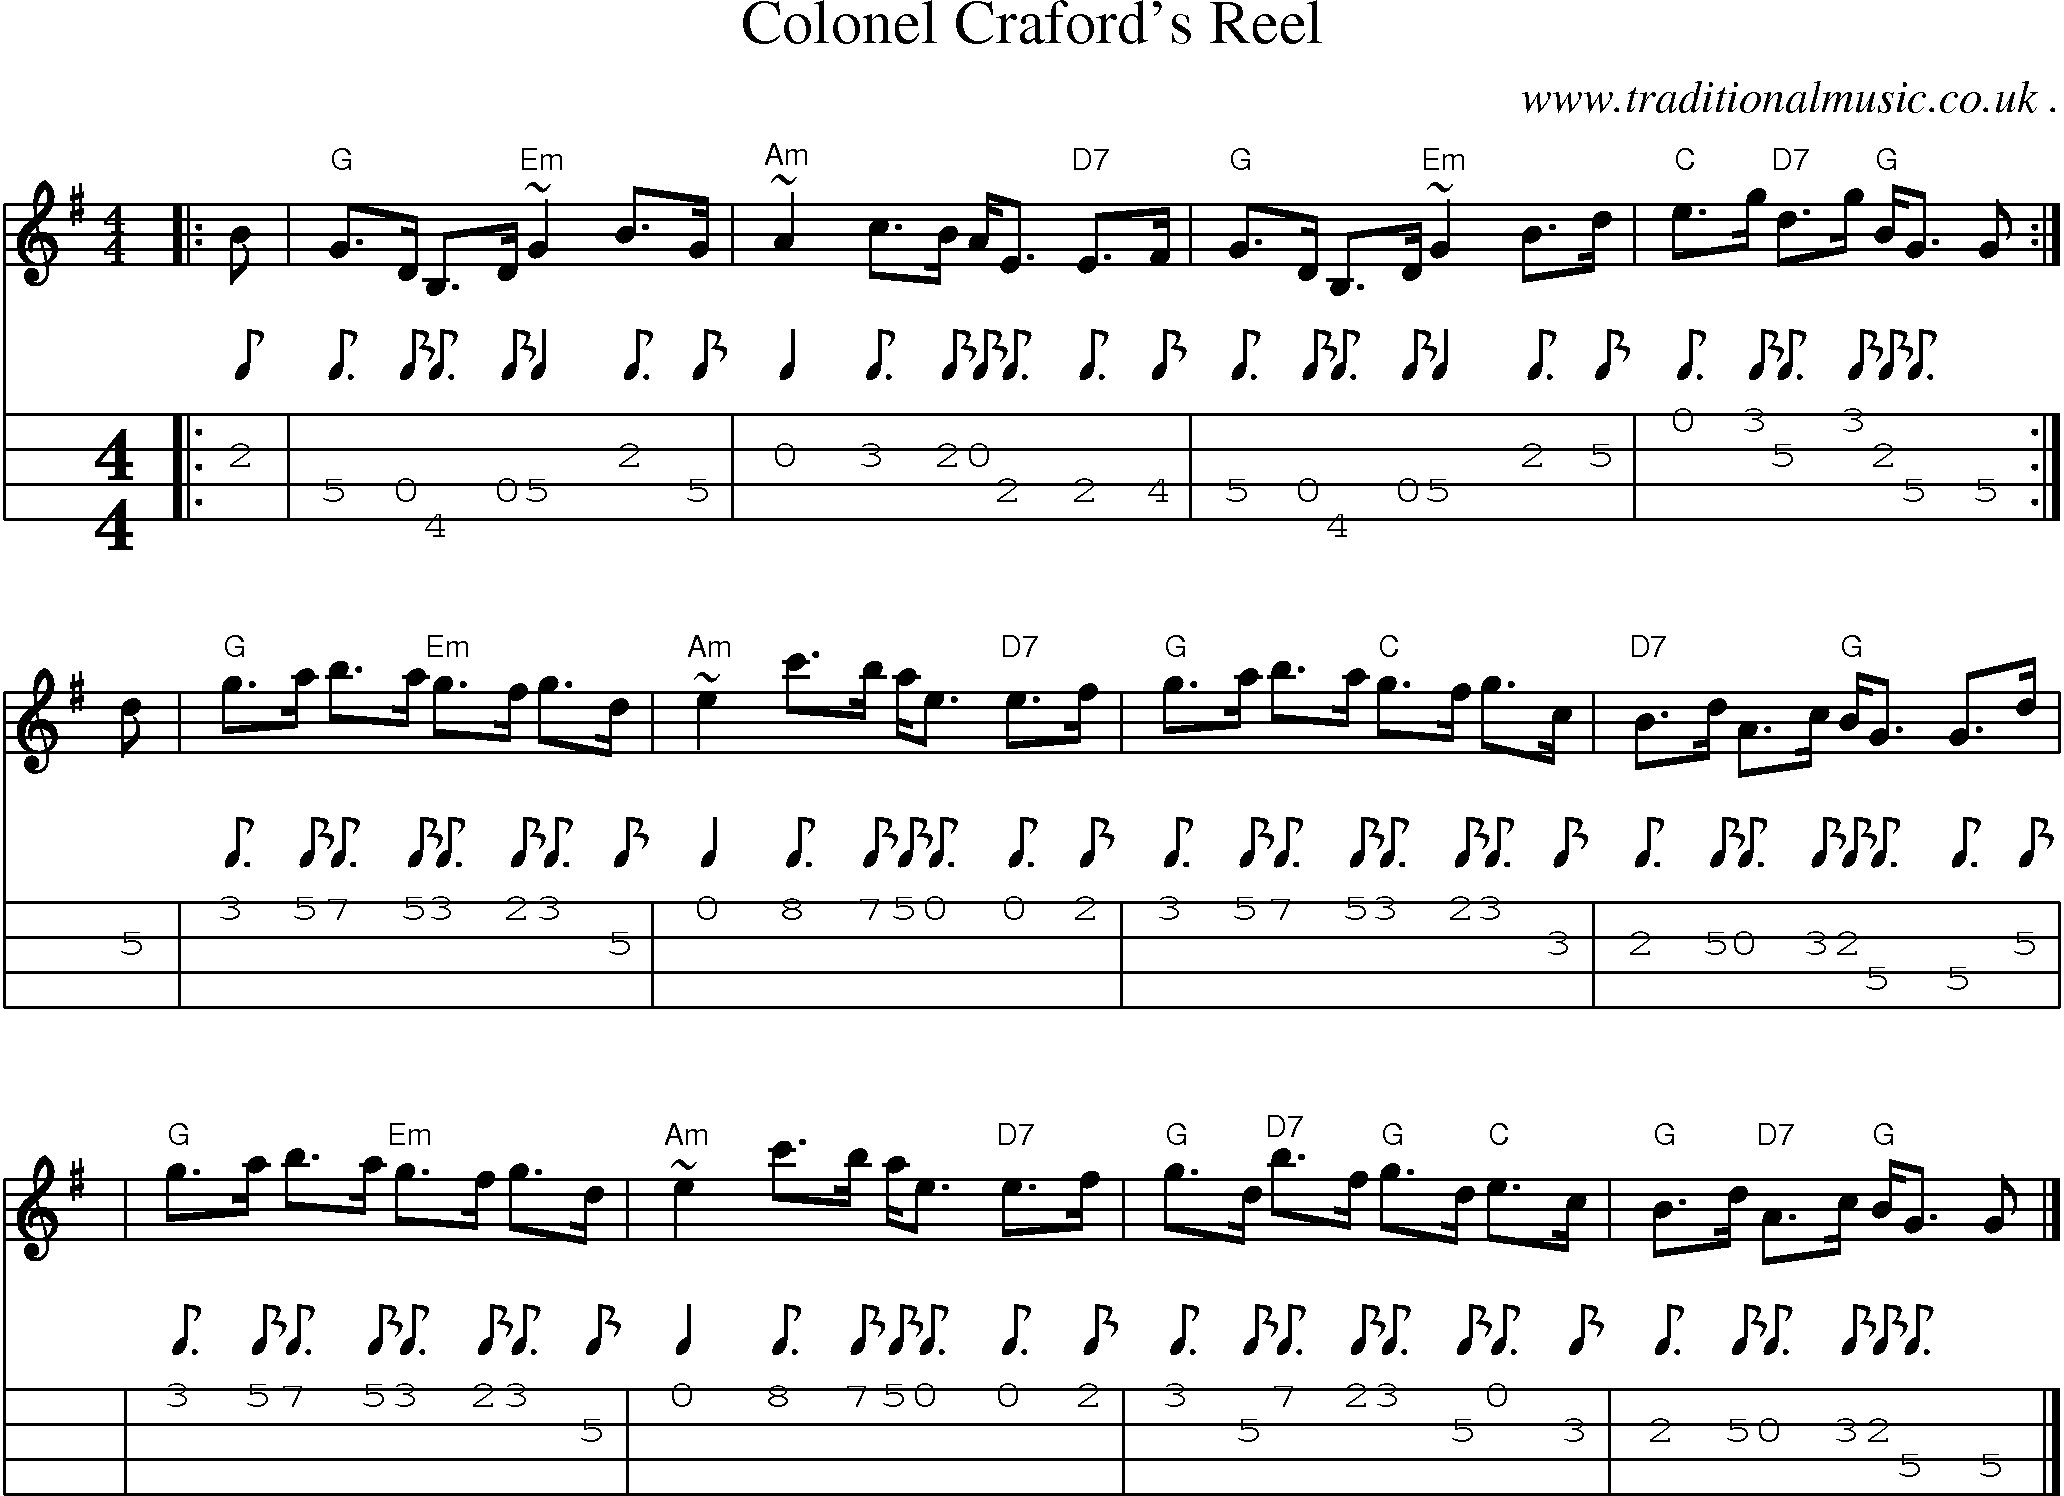 Sheet-music  score, Chords and Mandolin Tabs for Colonel Crafords Reel